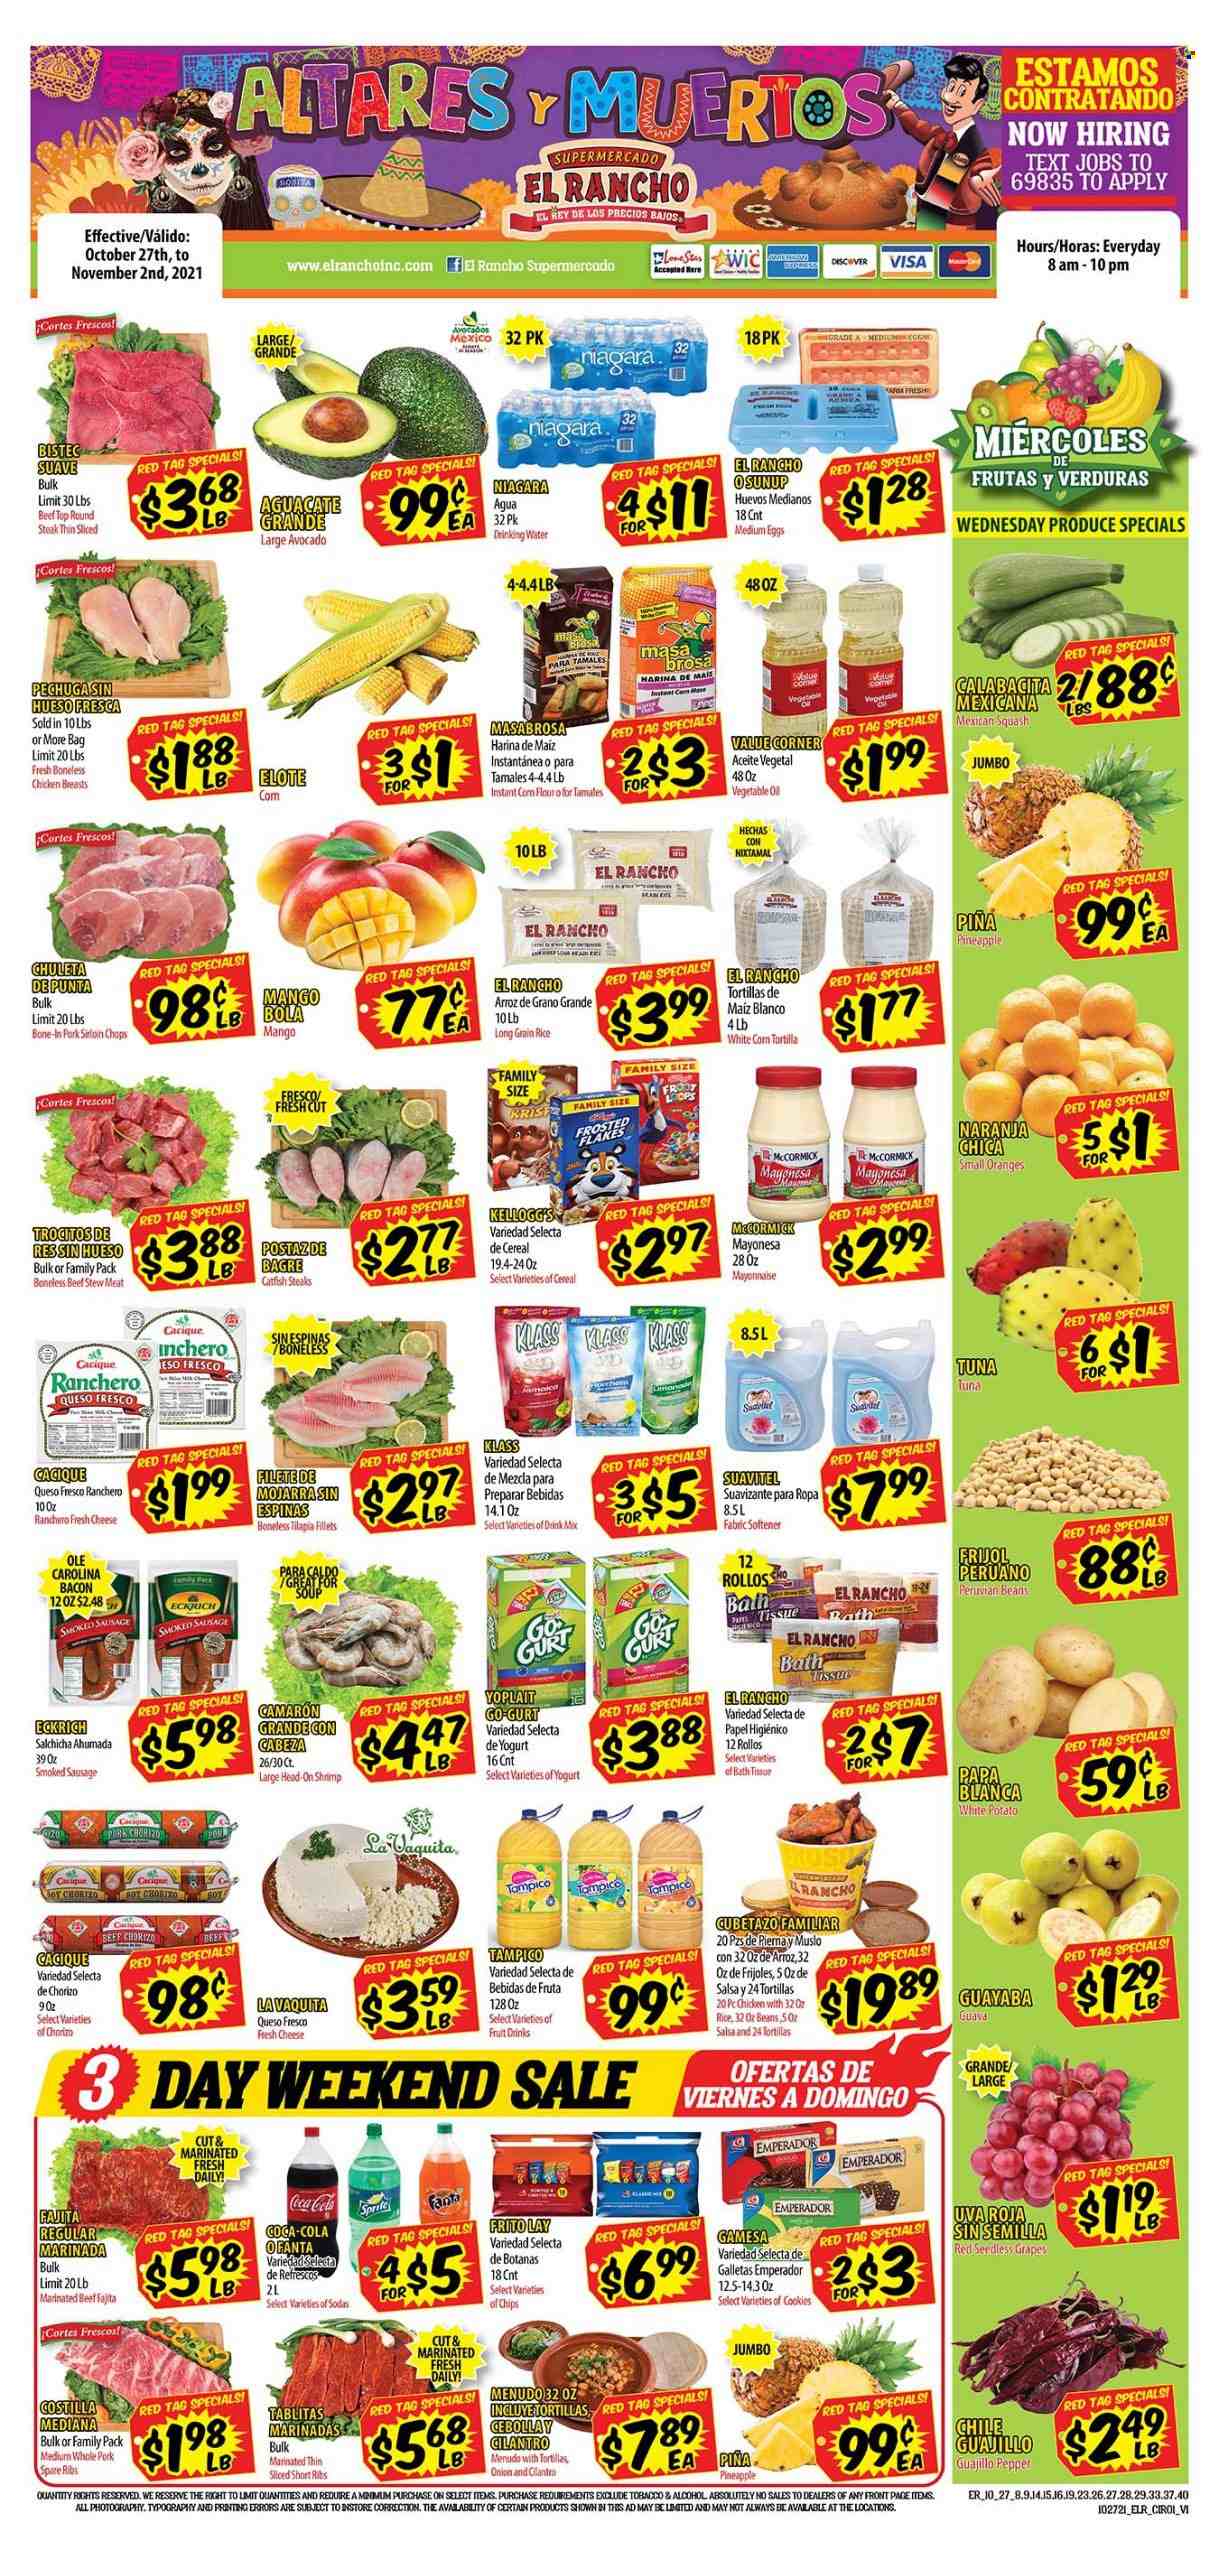 thumbnail - El Rancho Flyer - 10/27/2021 - 11/02/2021 - Sales products - stew meat, seedless grapes, tortillas, beans, mexican squash, avocado, grapes, guava, mango, pineapple, oranges, catfish, tilapia, tuna, shrimps, soup, fajita, bacon, chorizo, sausage, smoked sausage, queso fresco, cheese, yoghurt, Yoplait, eggs, mayonnaise, cookies, chips, cereals, rice, long grain rice, salsa, Coca-Cola, Fanta, fruit punch, alcohol, chicken breasts, beef meat, steak, round steak, marinated beef, pork loin, pork meat, pork ribs, pork spare ribs. Page 1.